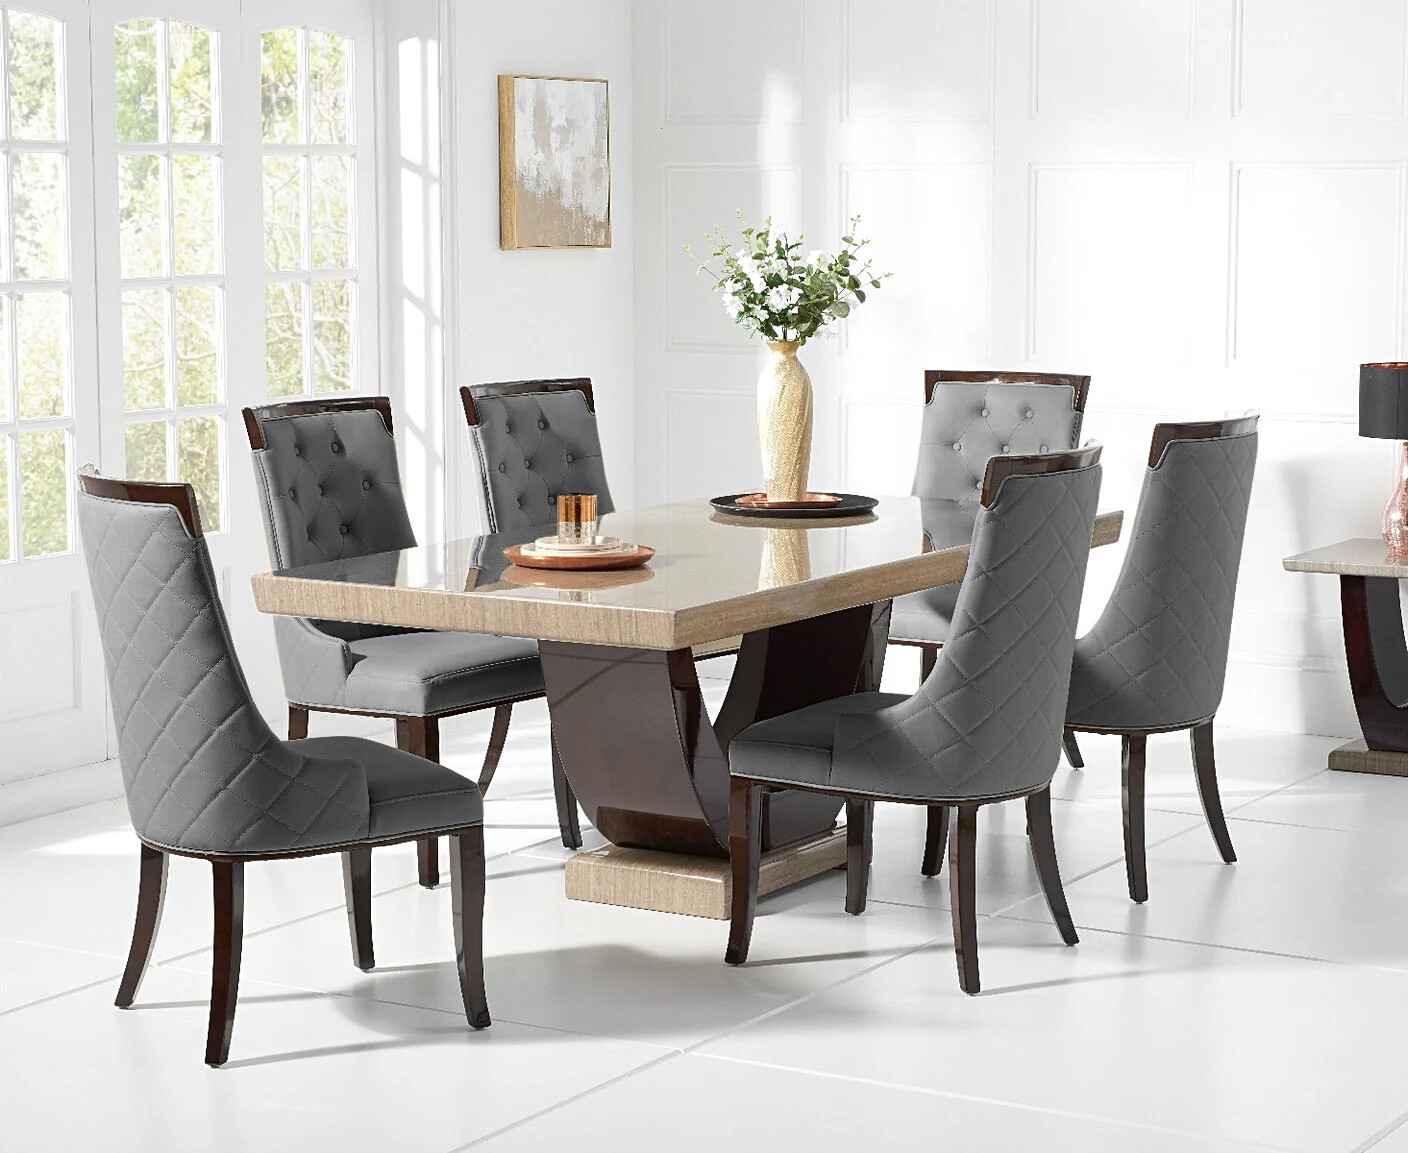 Photo 2 of Novara 170cm brown pedestal marble dining table with 6 grey francesca chairs